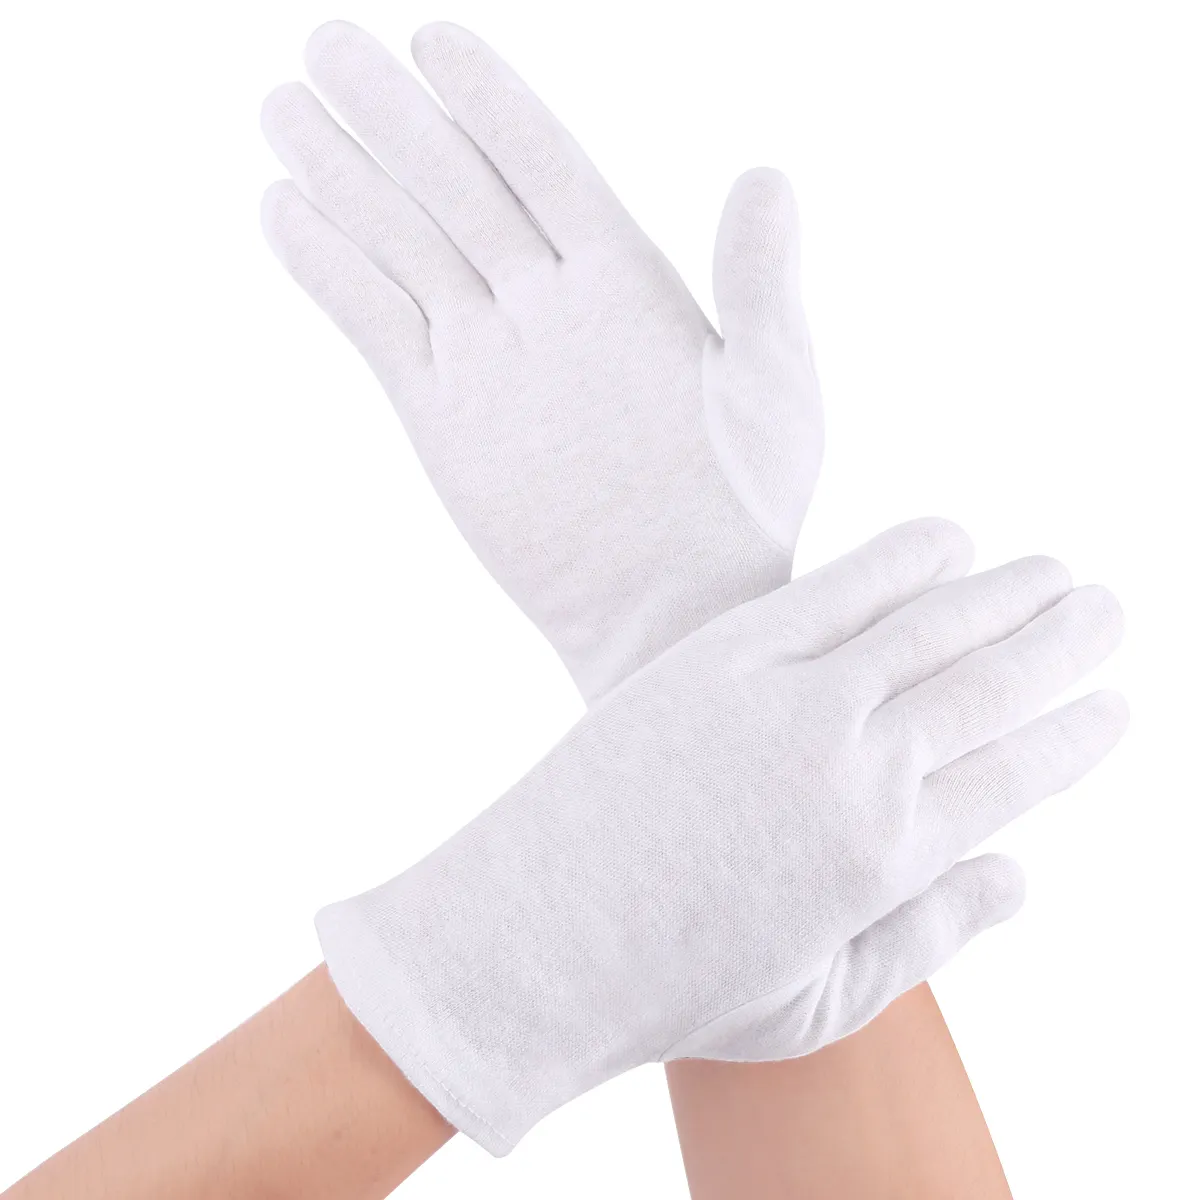 Premium Customized logo Uniform marching screen band printed 100% white cotton gloves Full Fingers by Canleo International